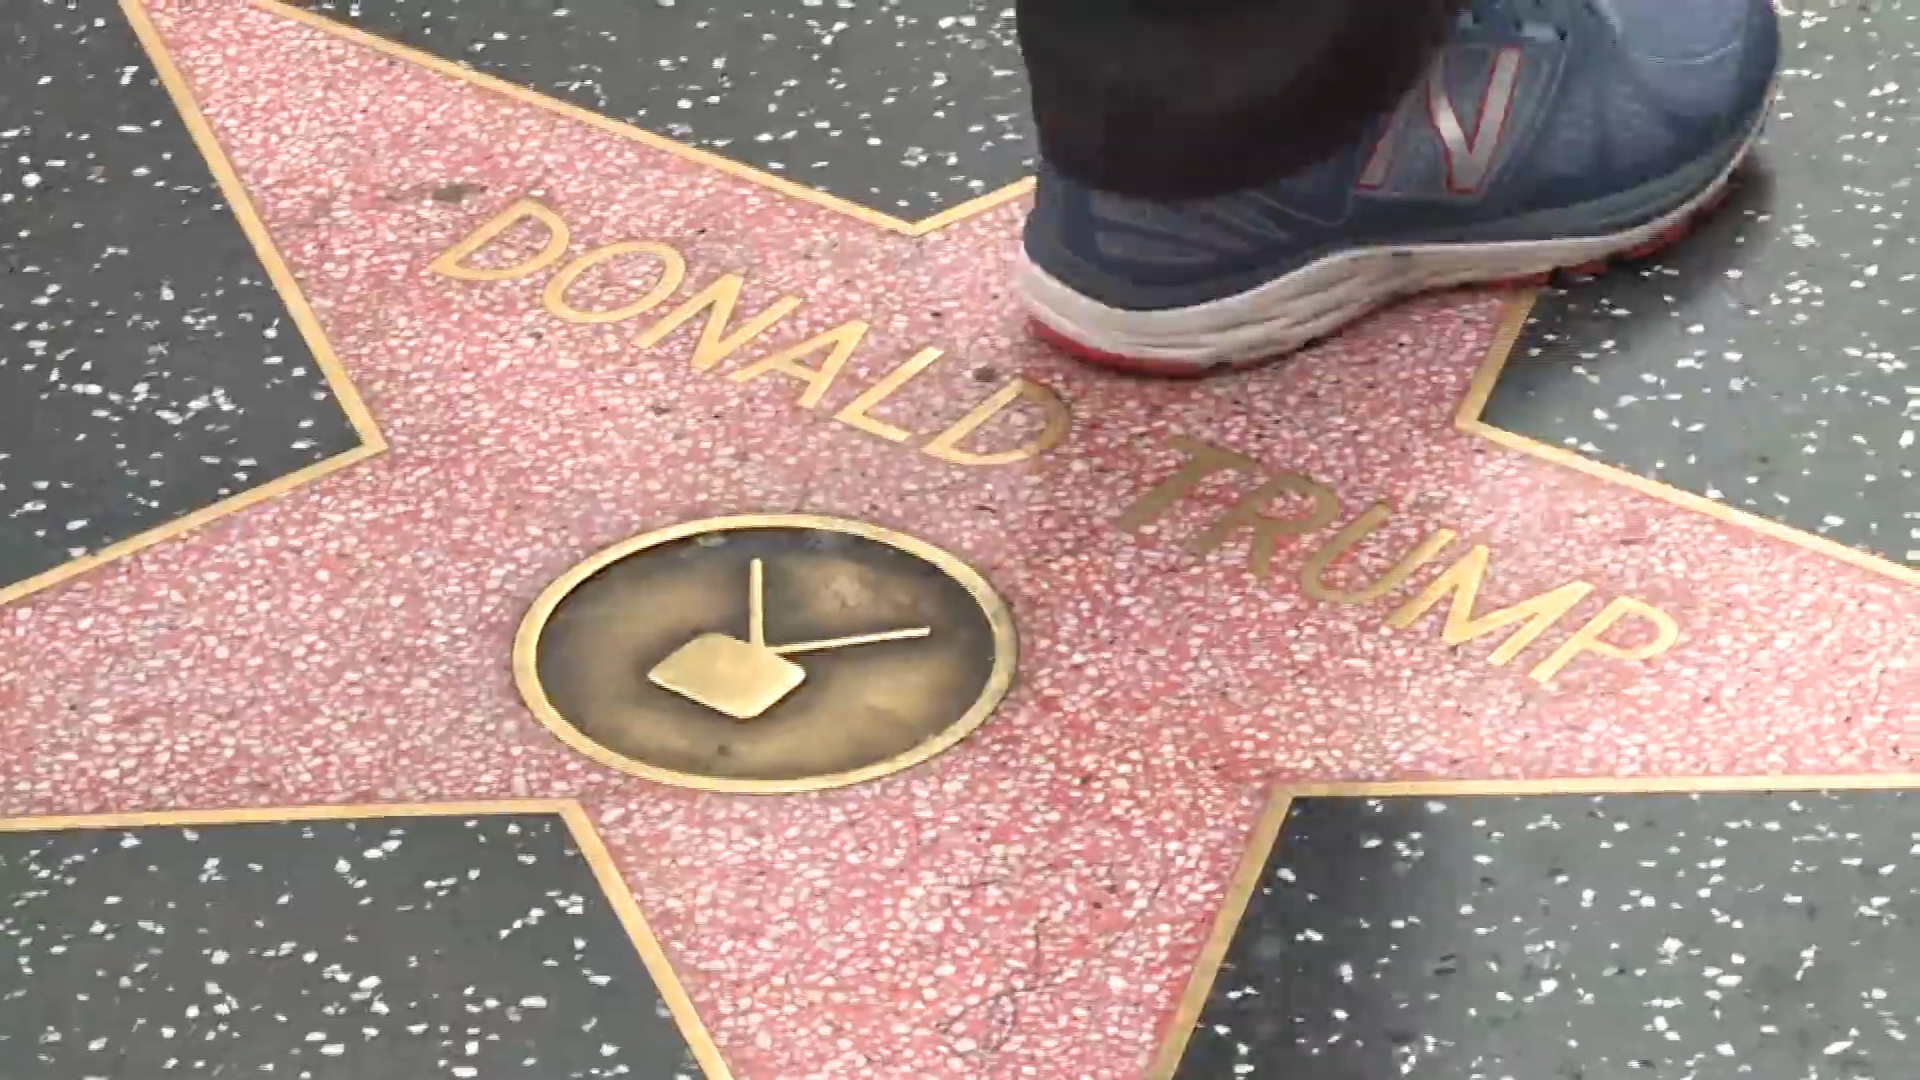 Donald Trump’s star defaced on Hollywood Walk of Fame